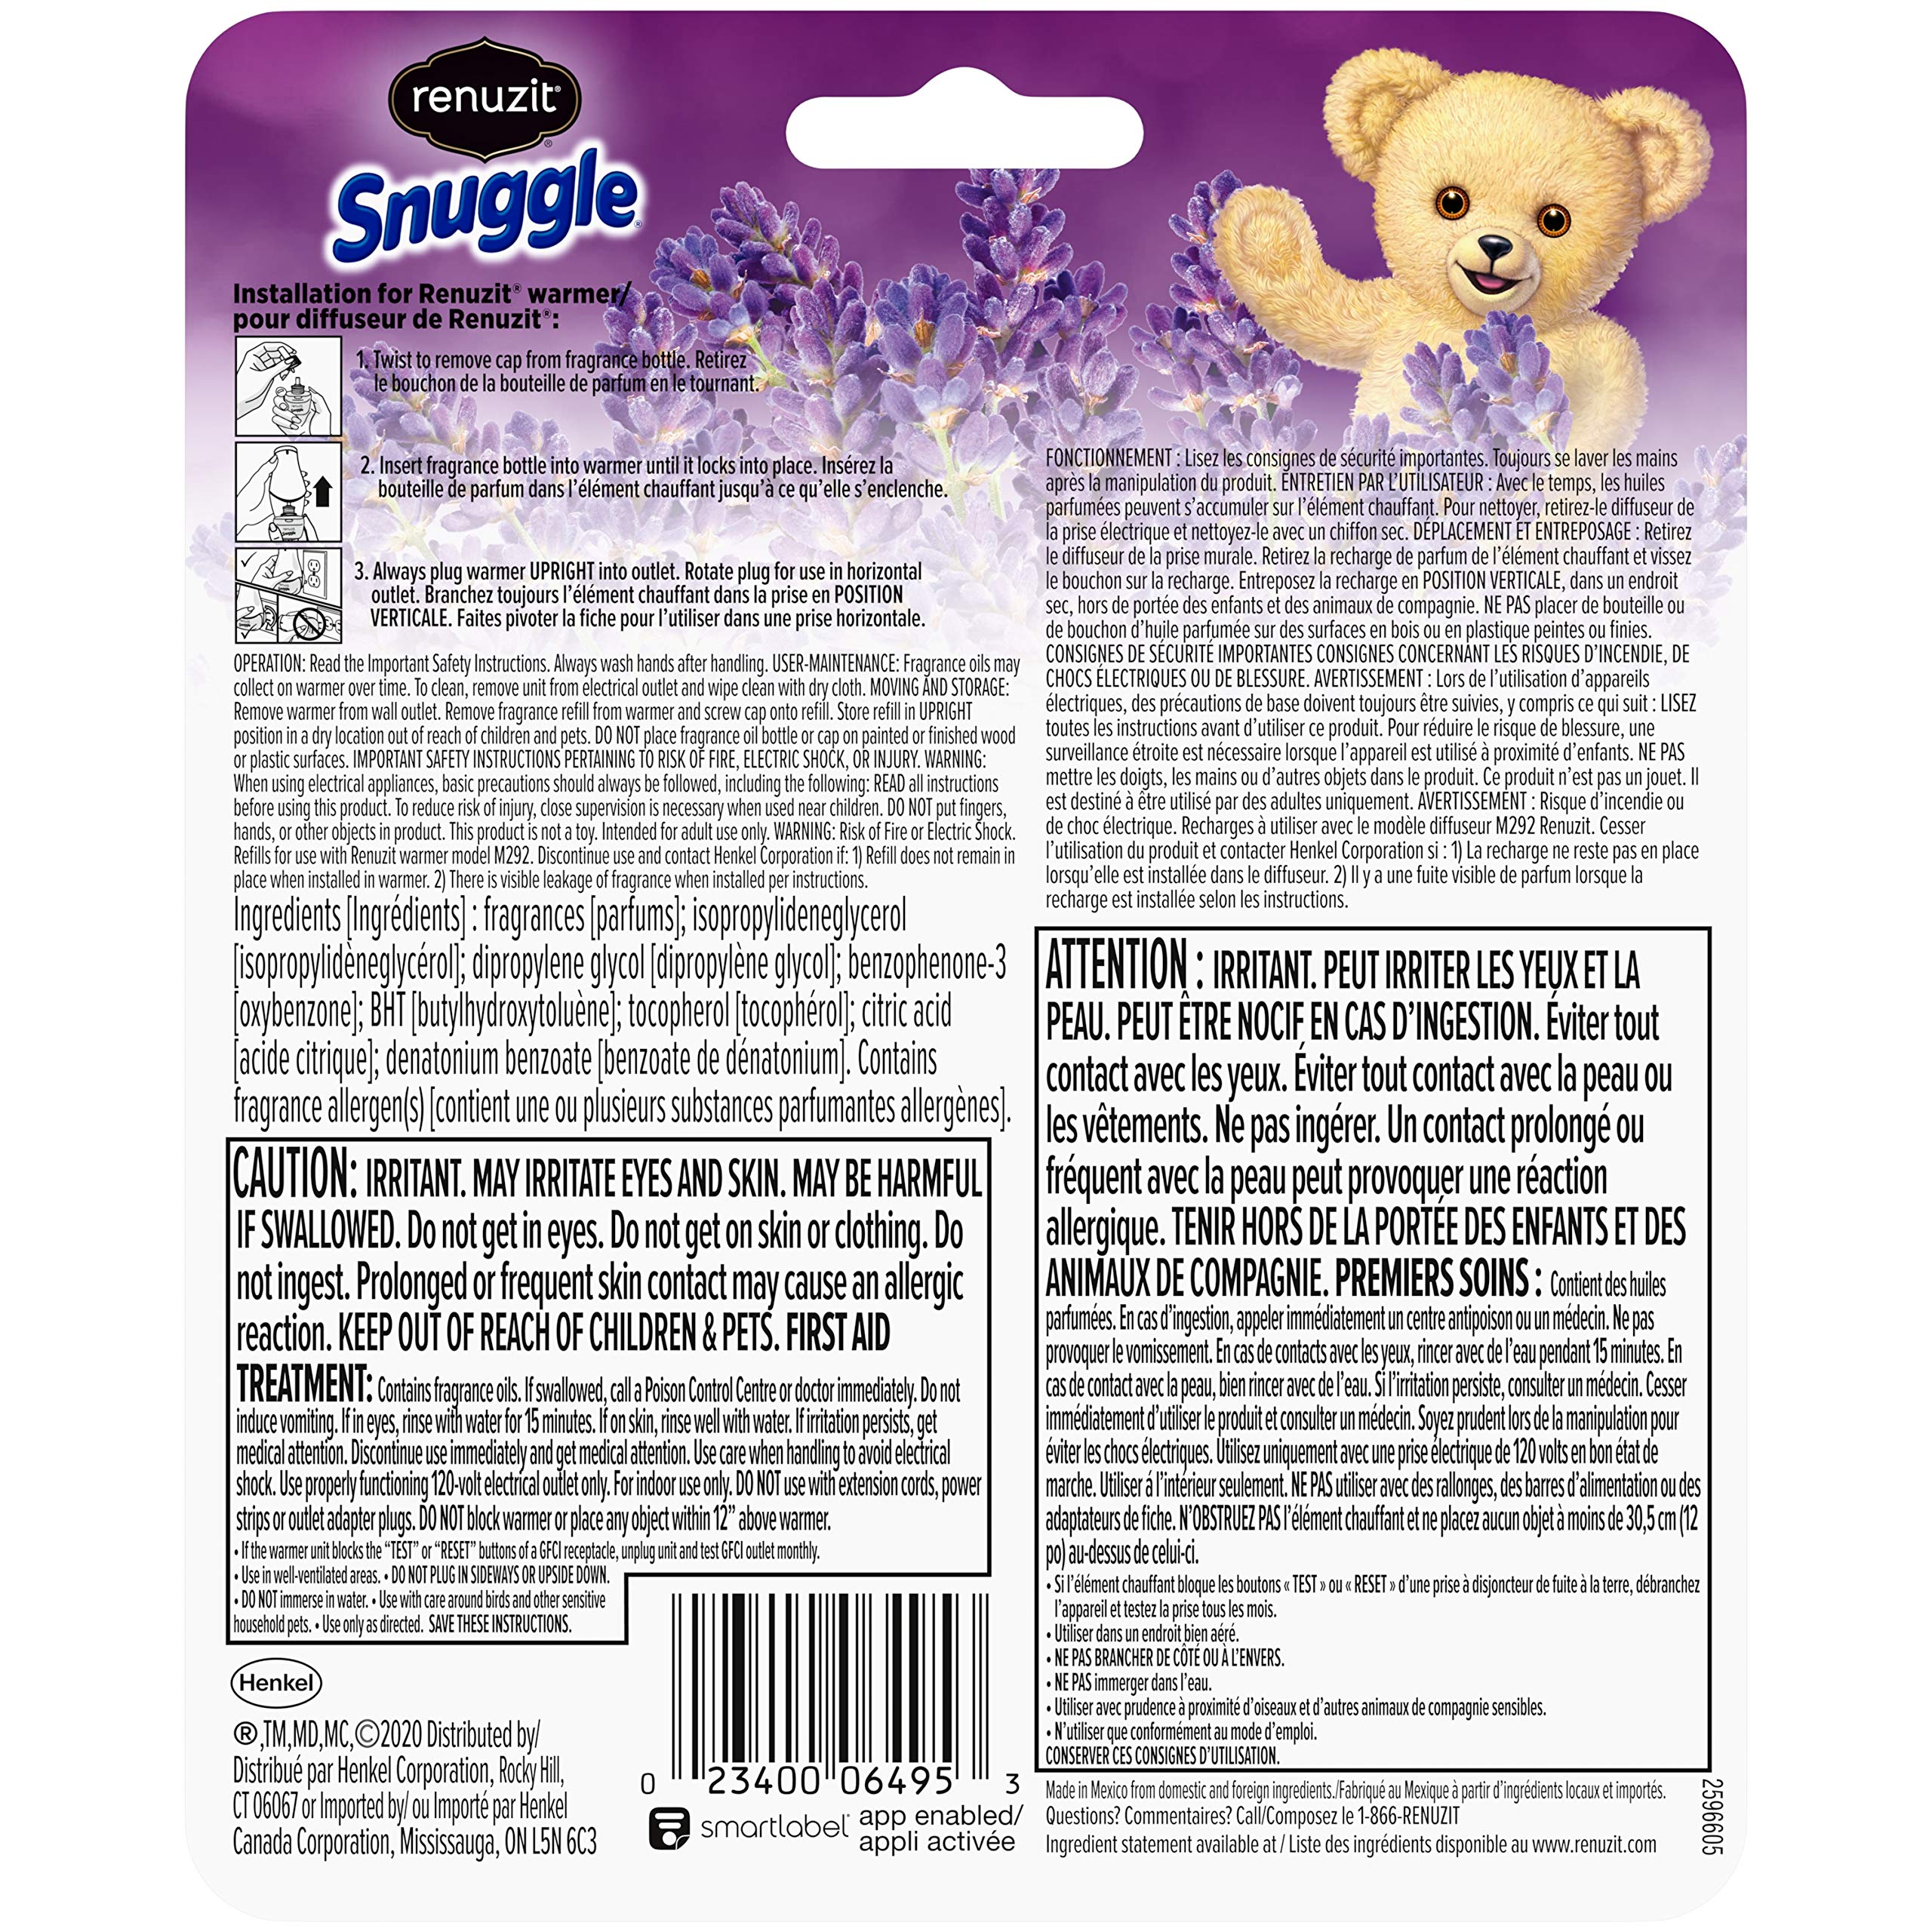 Renuzit Snuggle Scented Oil Refill for Plugin Air Fresheners, Relaxing Lavender, 2 Count (Pack of 1)